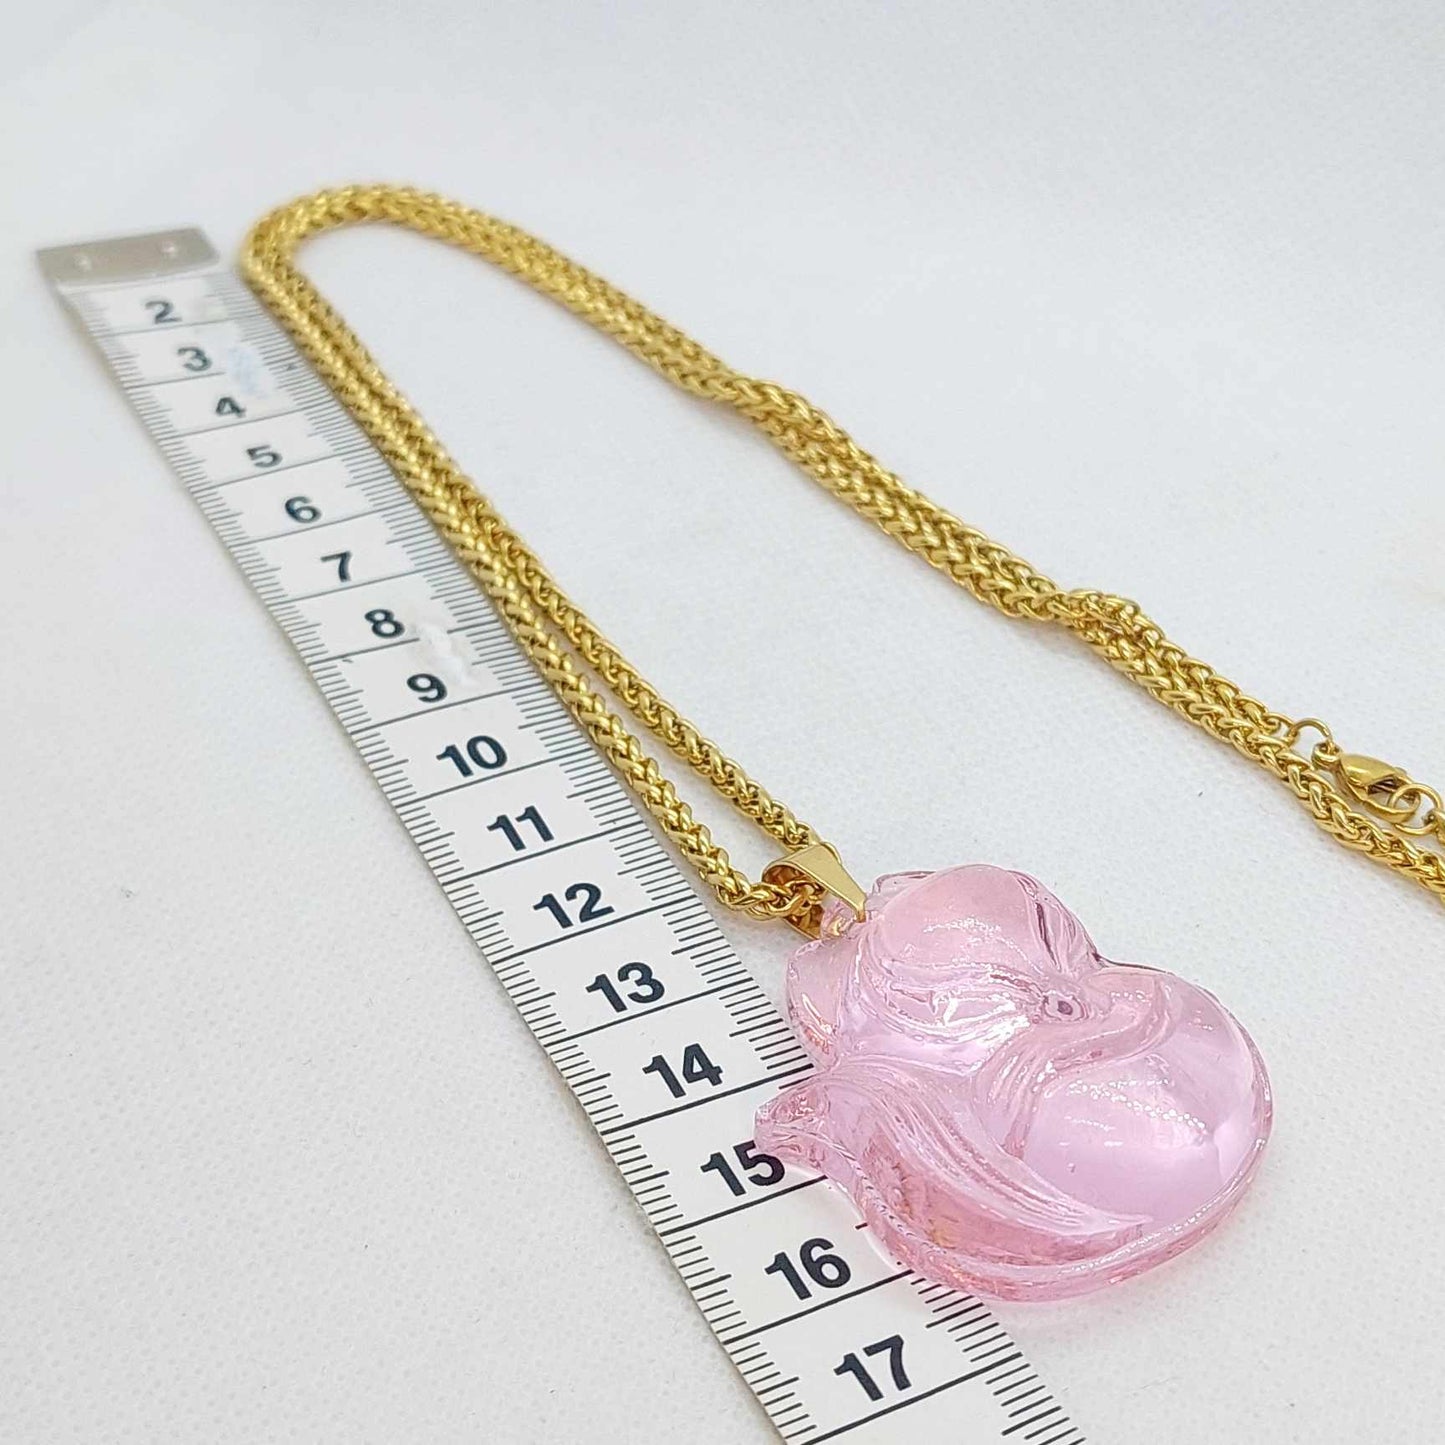 Natural Pink Chalcedony Nine Tailed Fox Pendant with Stainless Steel Chain Necklace